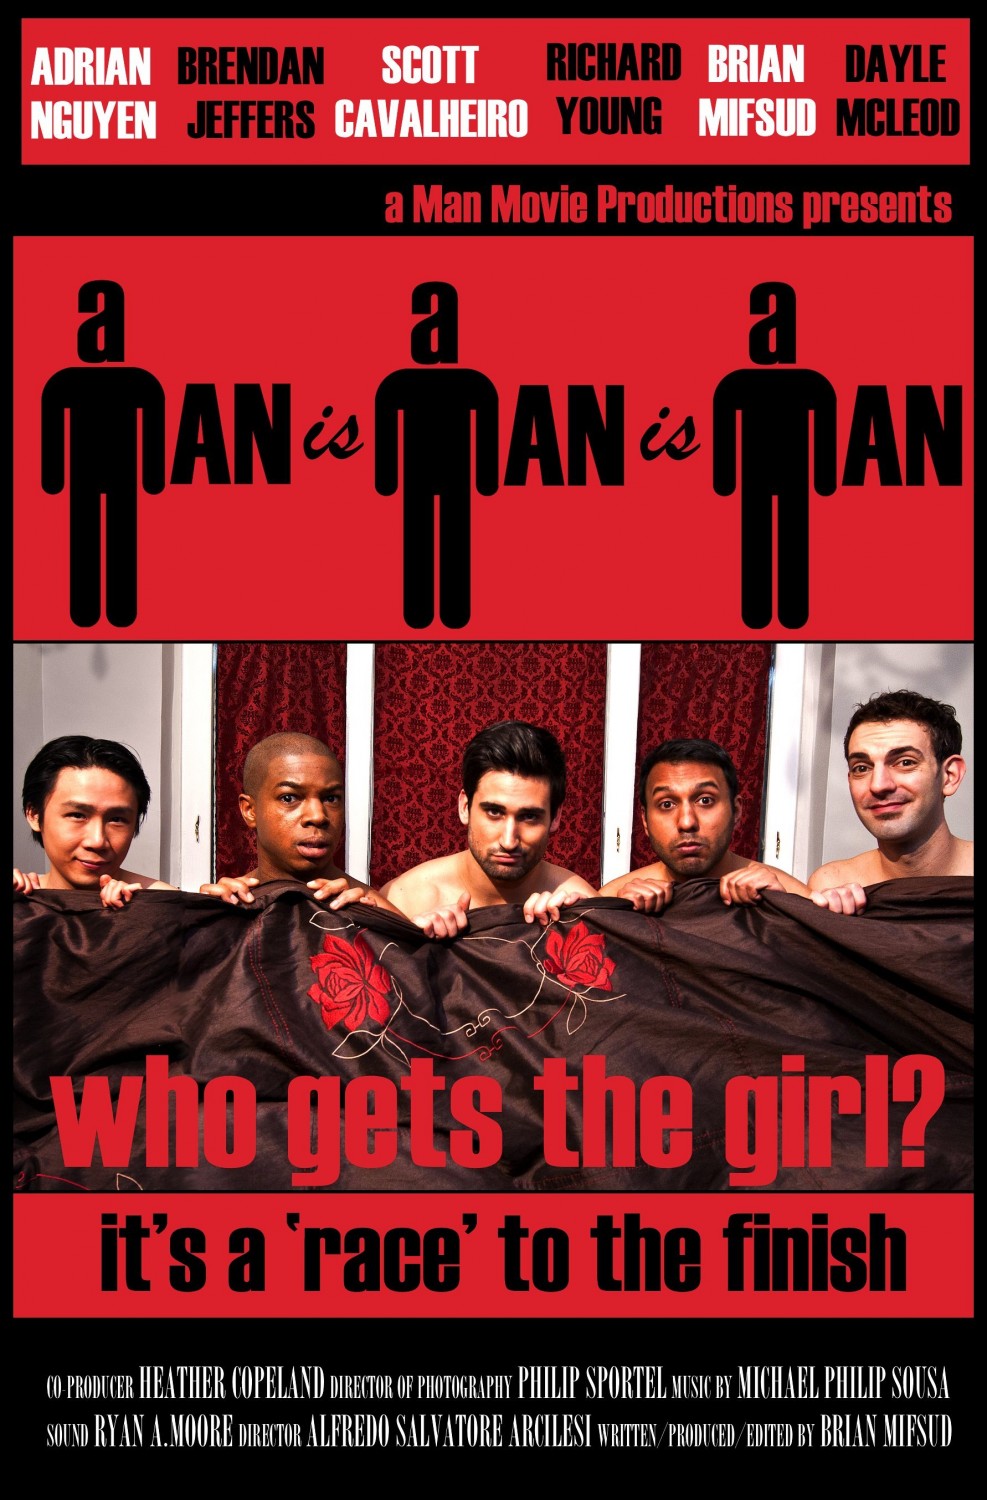 Extra Large Movie Poster Image for A Man Is a Man Is a Man